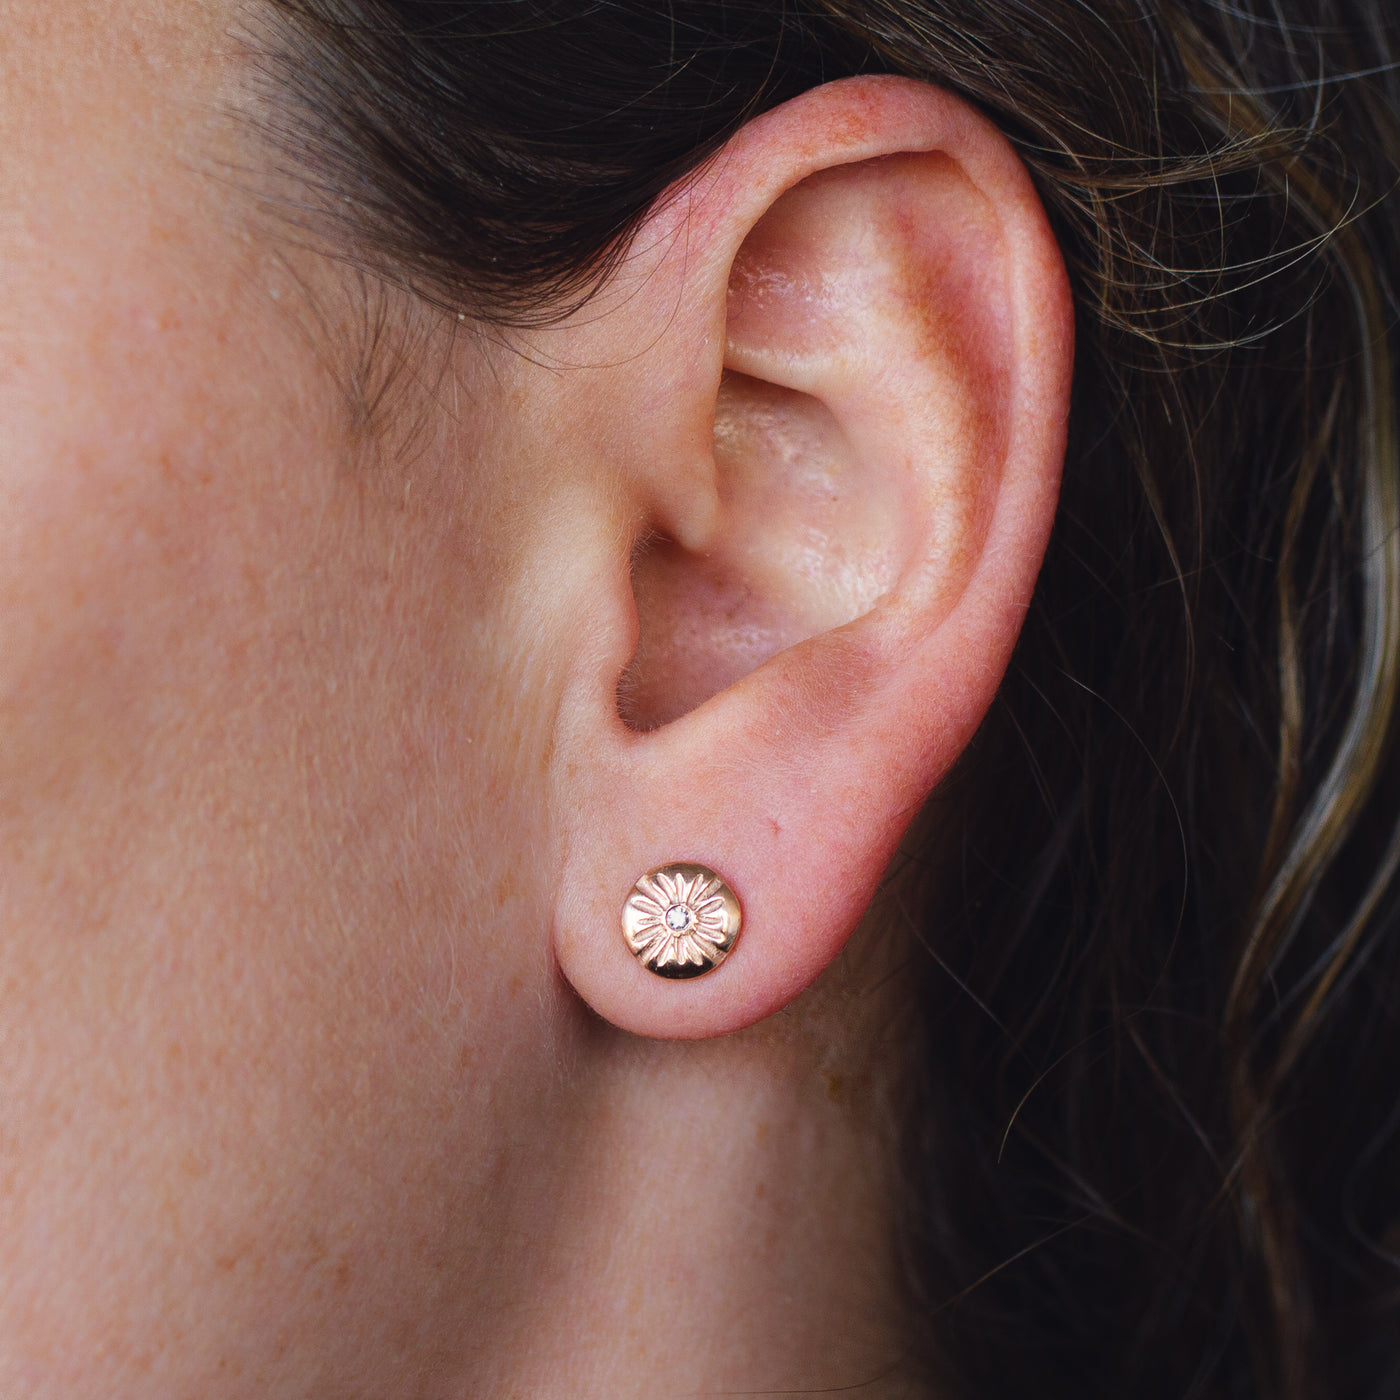 14k rose gold lucia stud earrings with white diamond centers on an ear